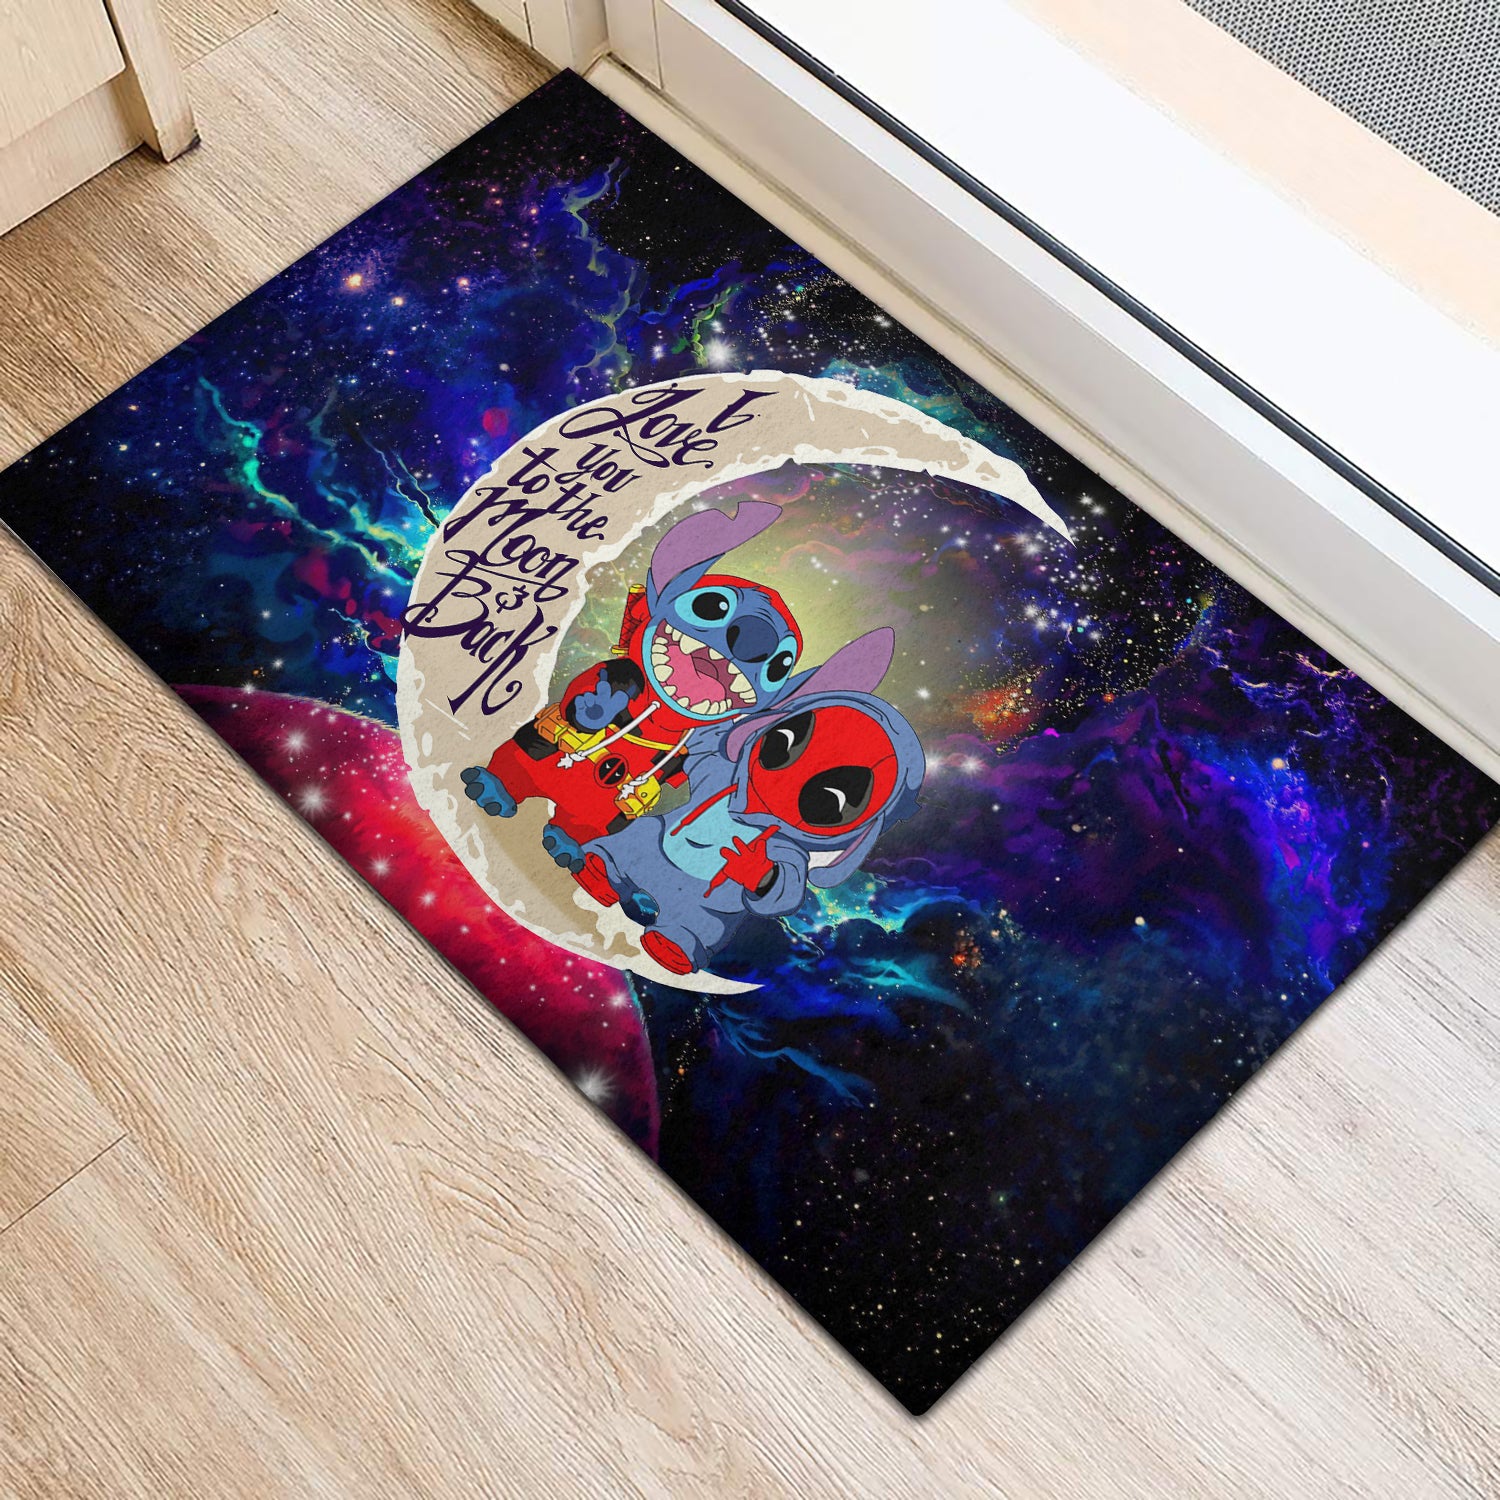 Cute Deadpool And Stitch Love You To The Moon Galaxy Doormat Home Decor Nearkii